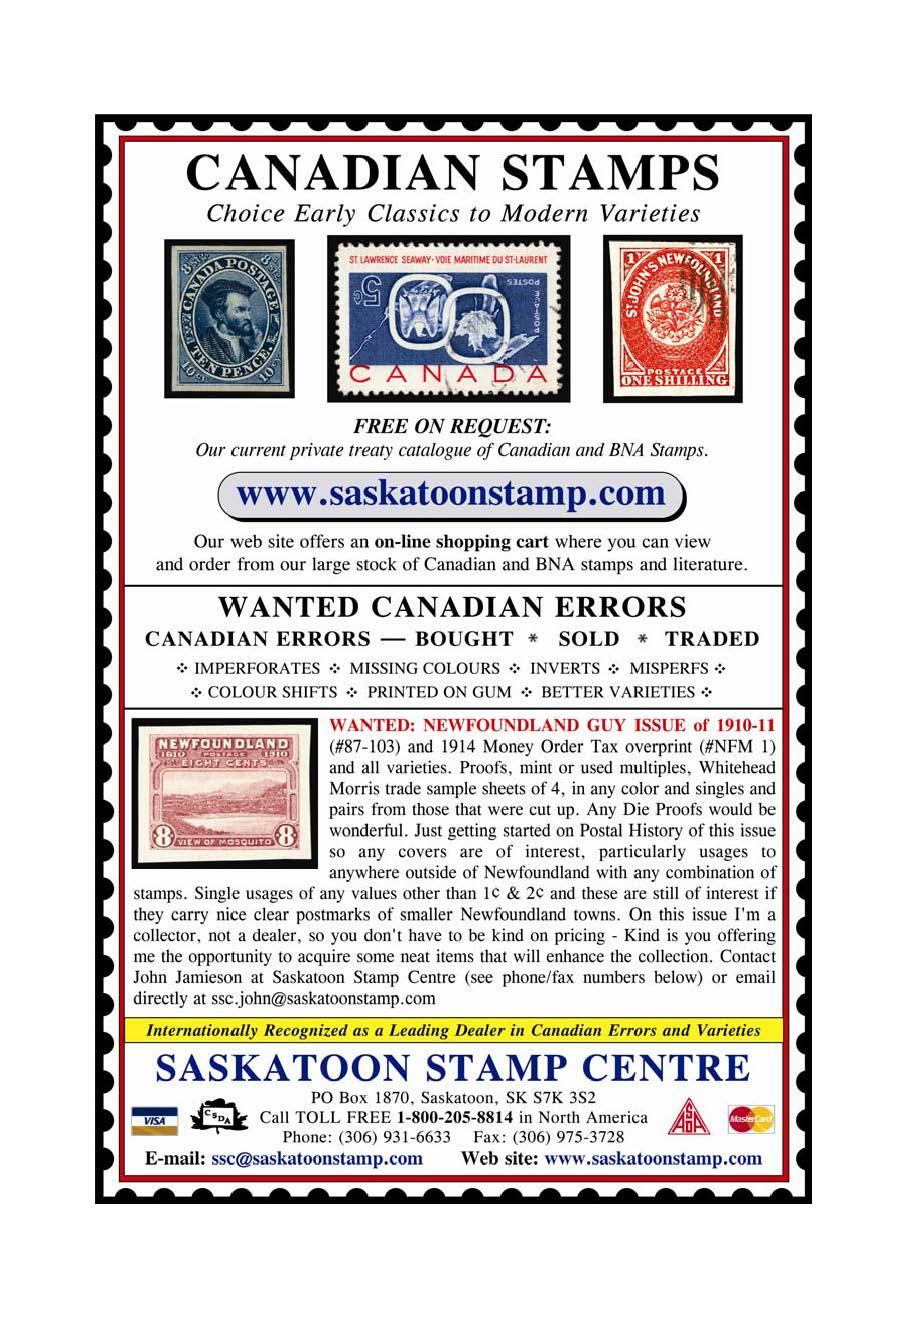 CANADIAN STAMPS Choice Early Classics to Modern Varieties FREE ON REQUEST: Our current private treary catalogue of Canadian and BNA Stamps. ( www.saskatoonstamp.